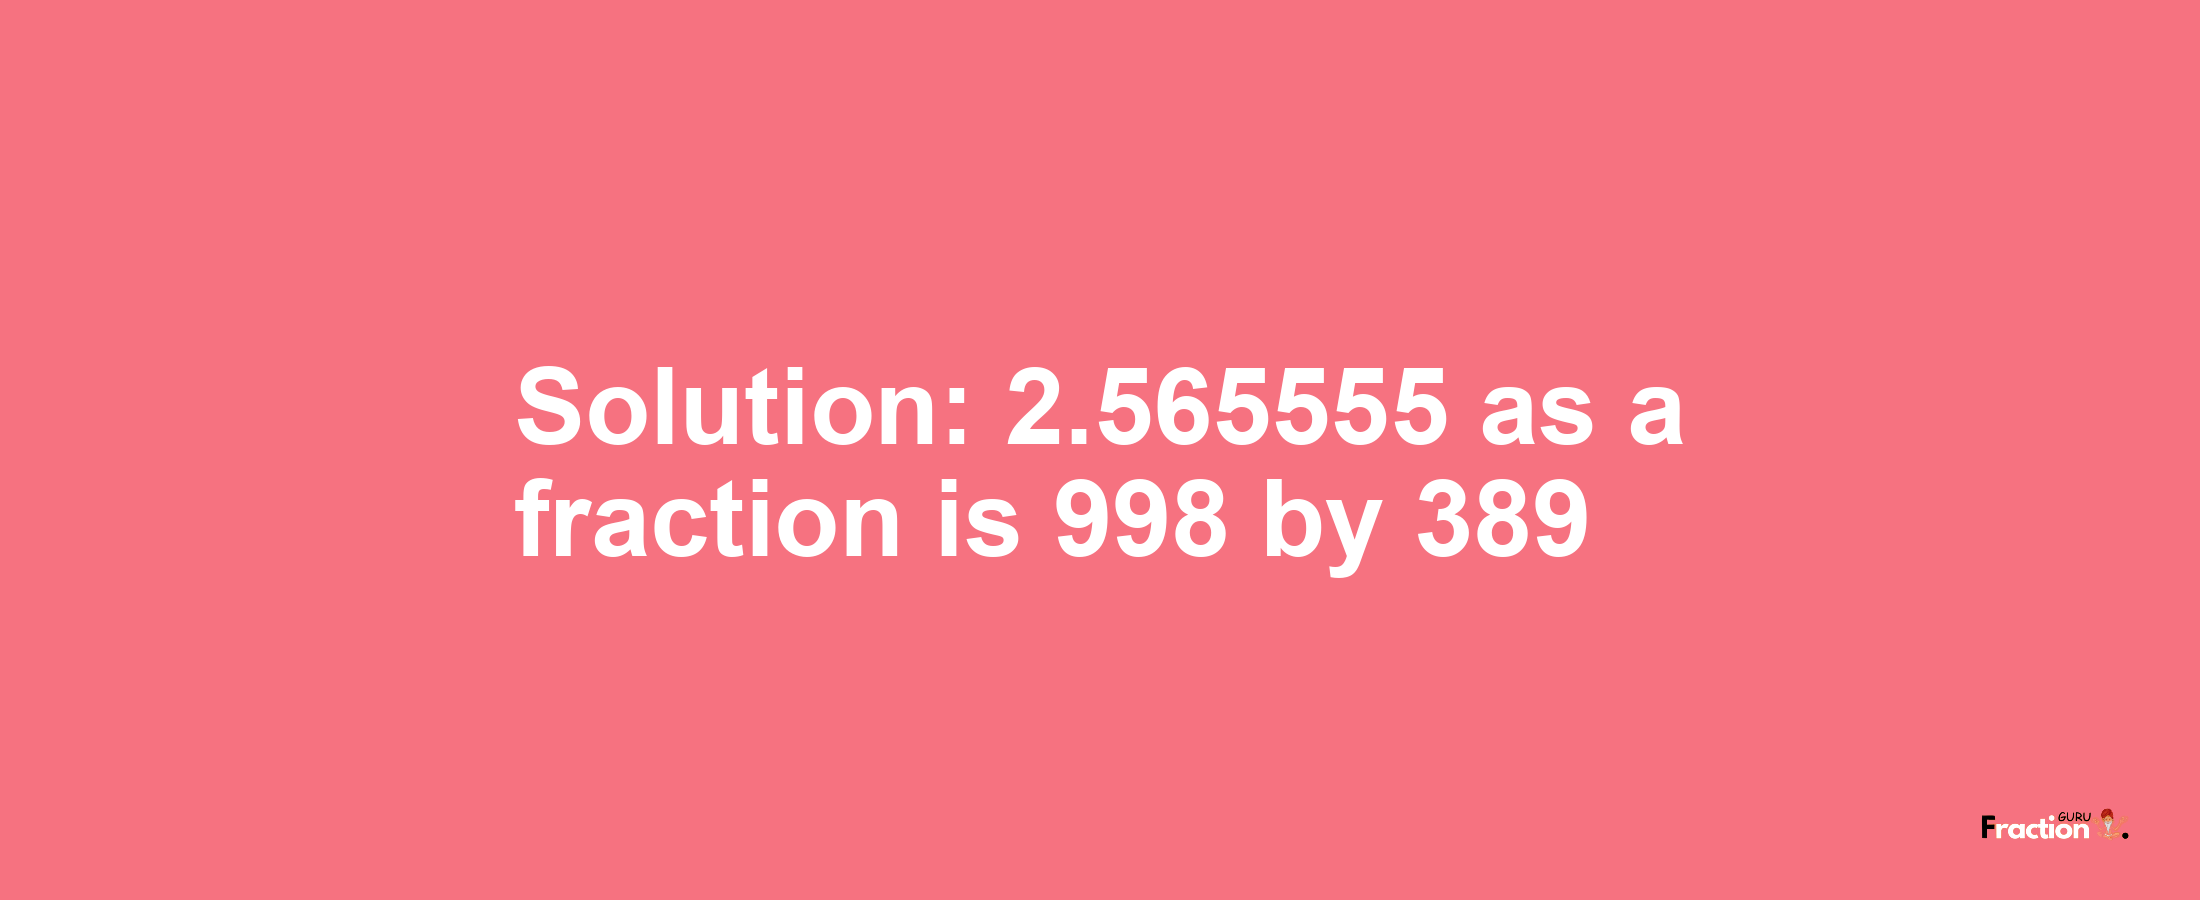 Solution:2.565555 as a fraction is 998/389